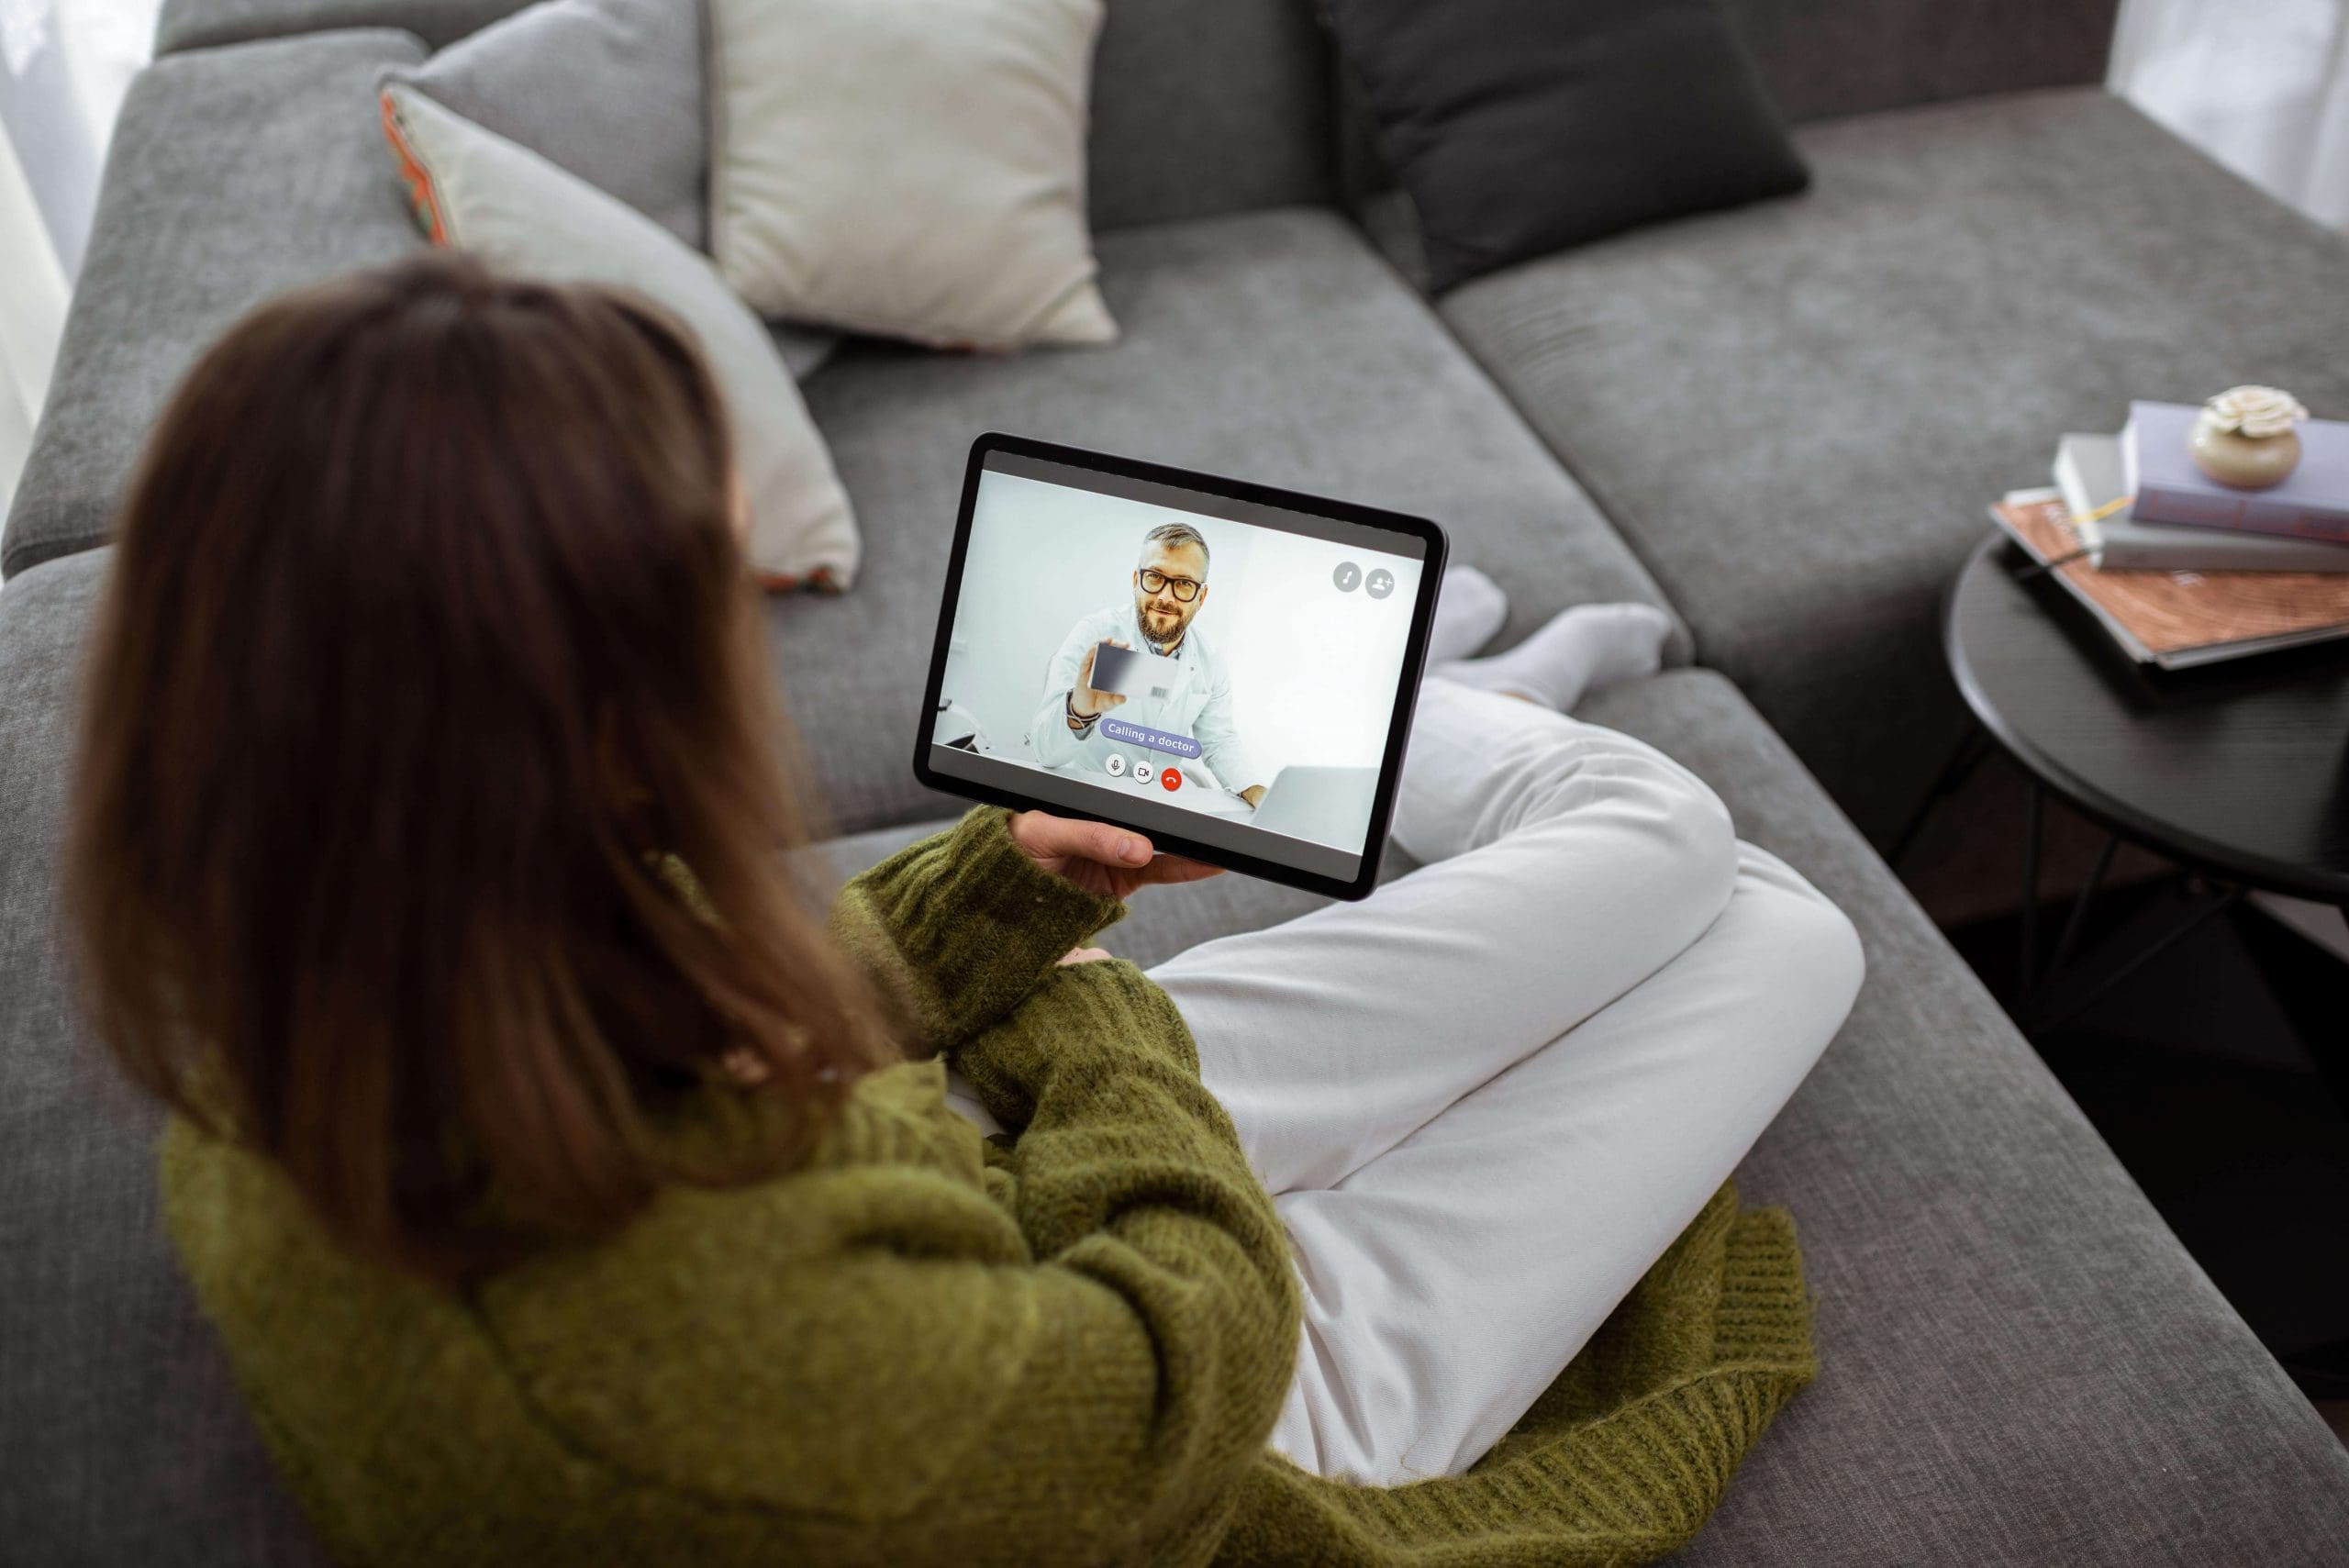 How to access and use telehealth services